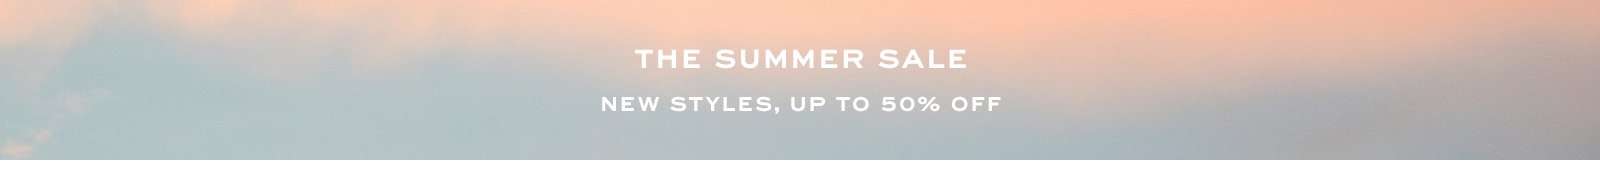 The Summer Sale New Styles Up To 50% Off